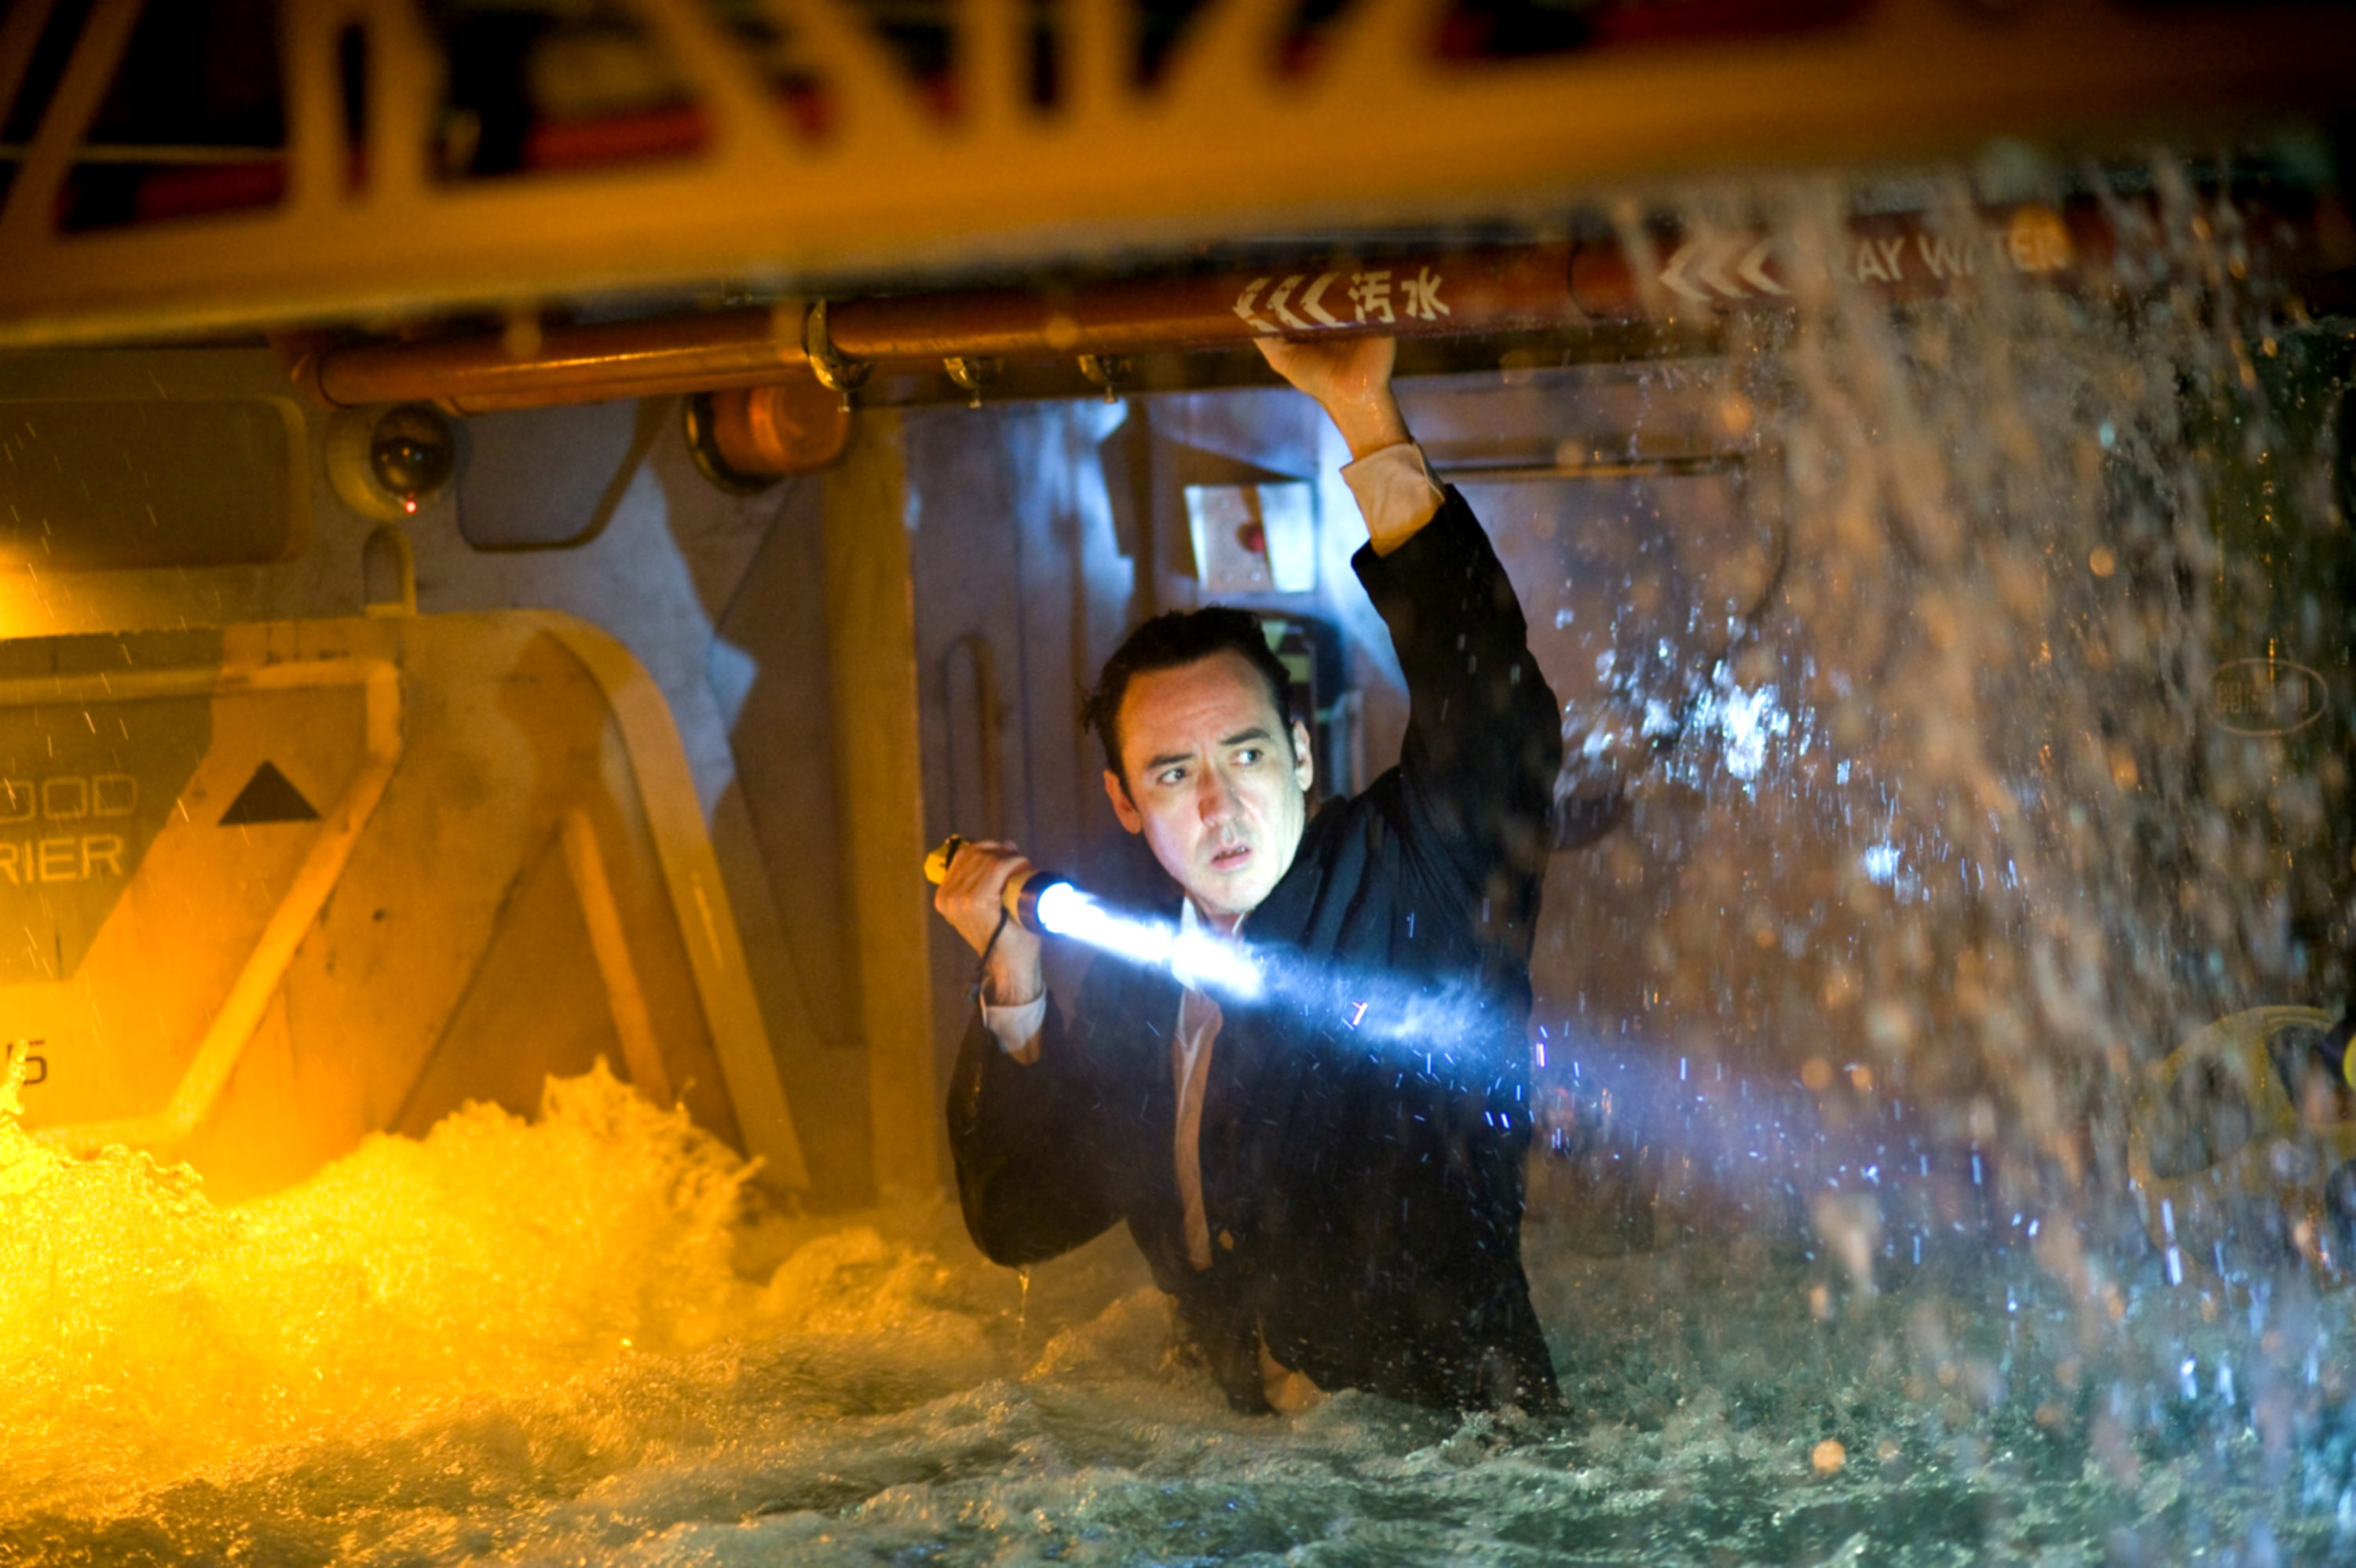 In a scene, John Cusack in a suit clings to a vehicle&#x27;s underside with a flashlight in water